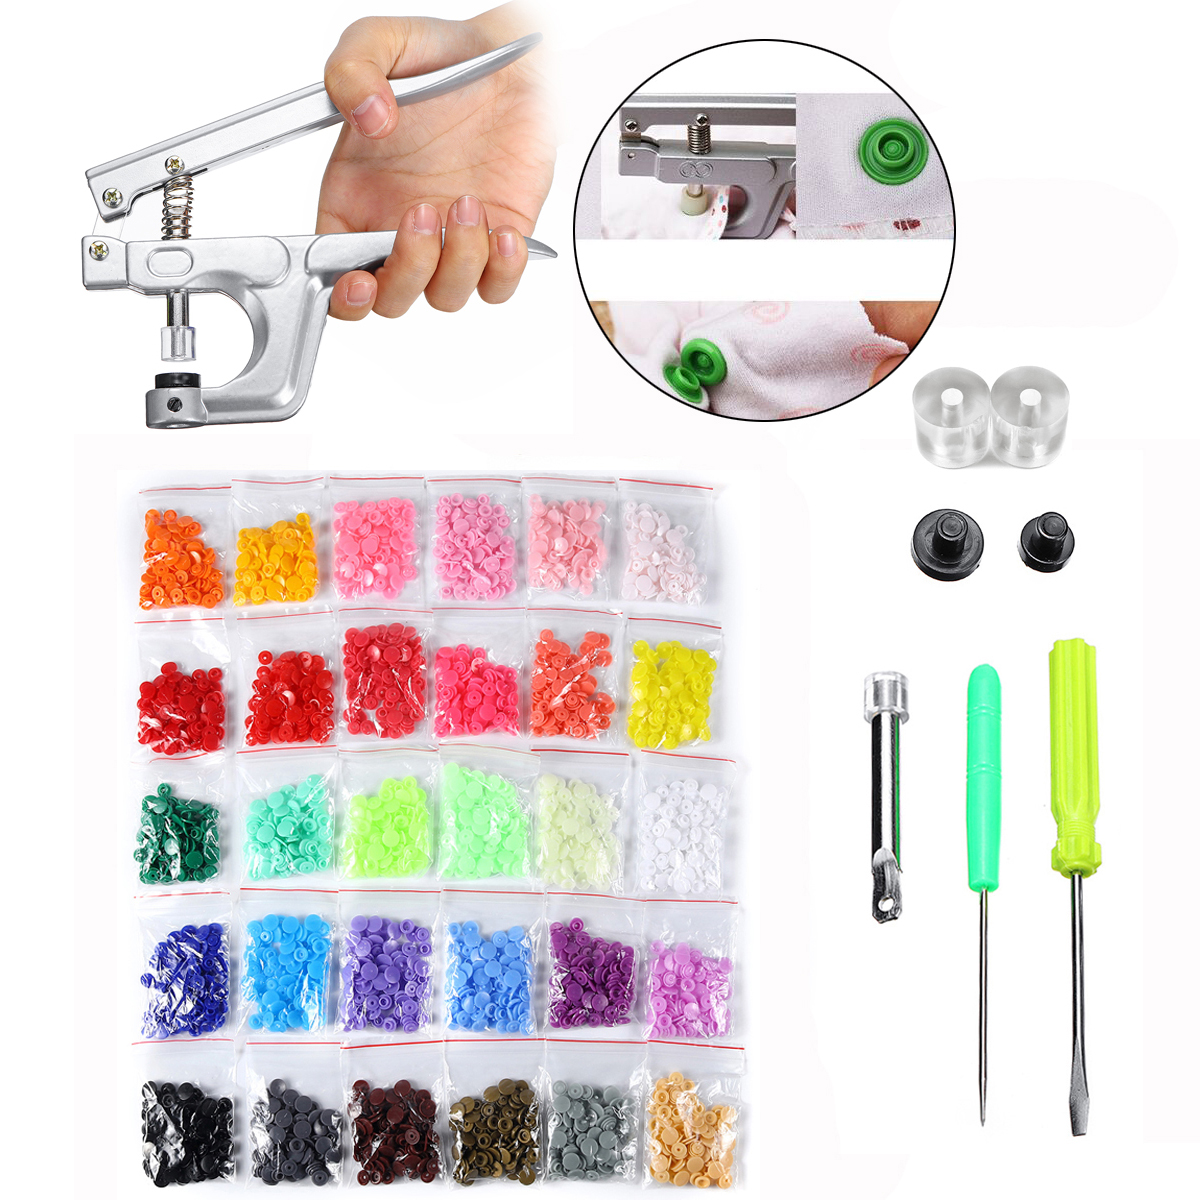 

600Pcs Fastener Snap Kit T5 Snap Buttons Pliers Helper Handheld Sewing Tool